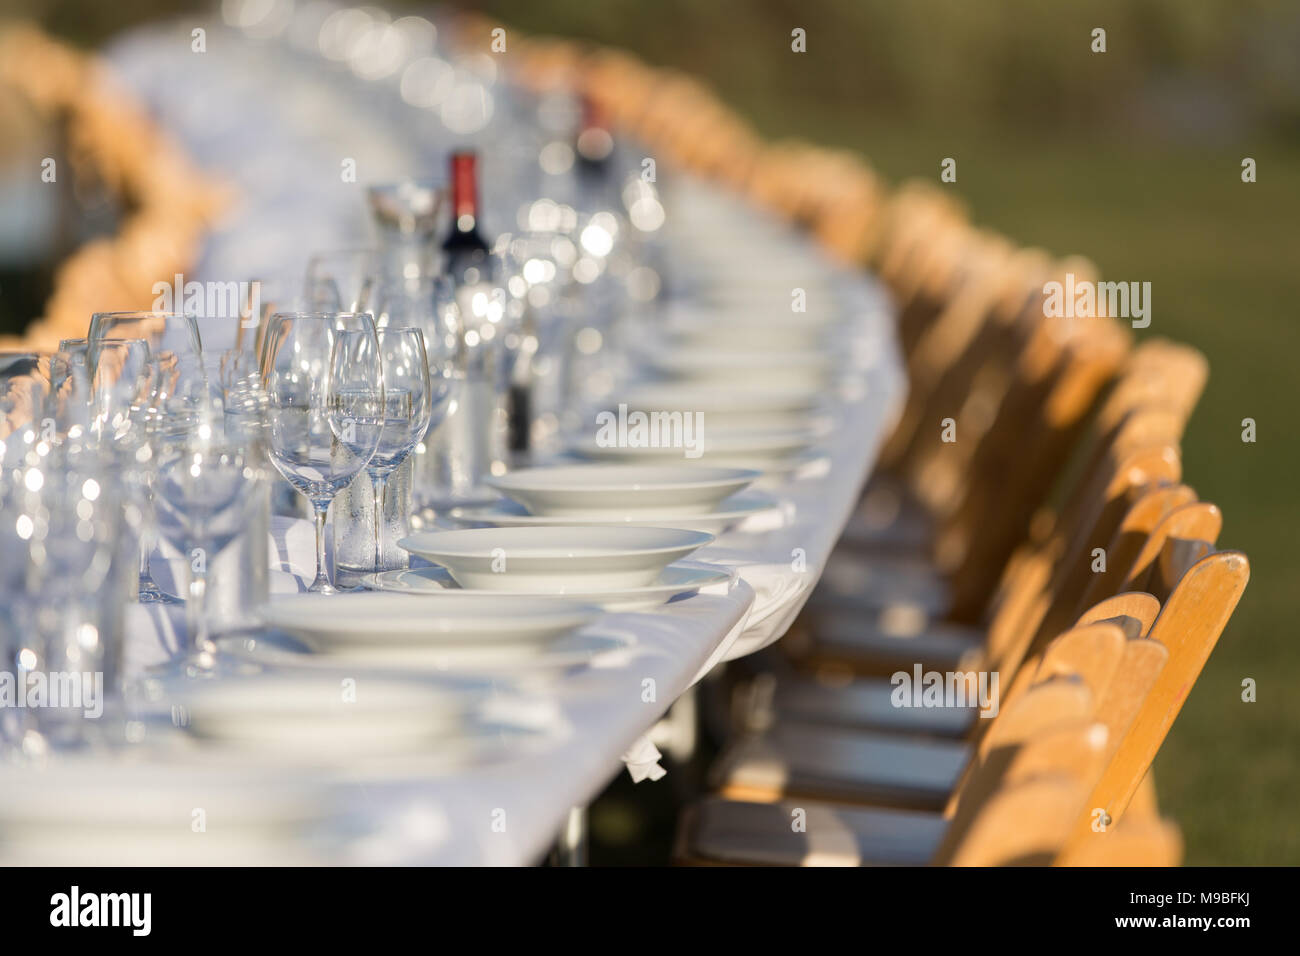 A long table with wine glasses at an outdoor event Stock Photo